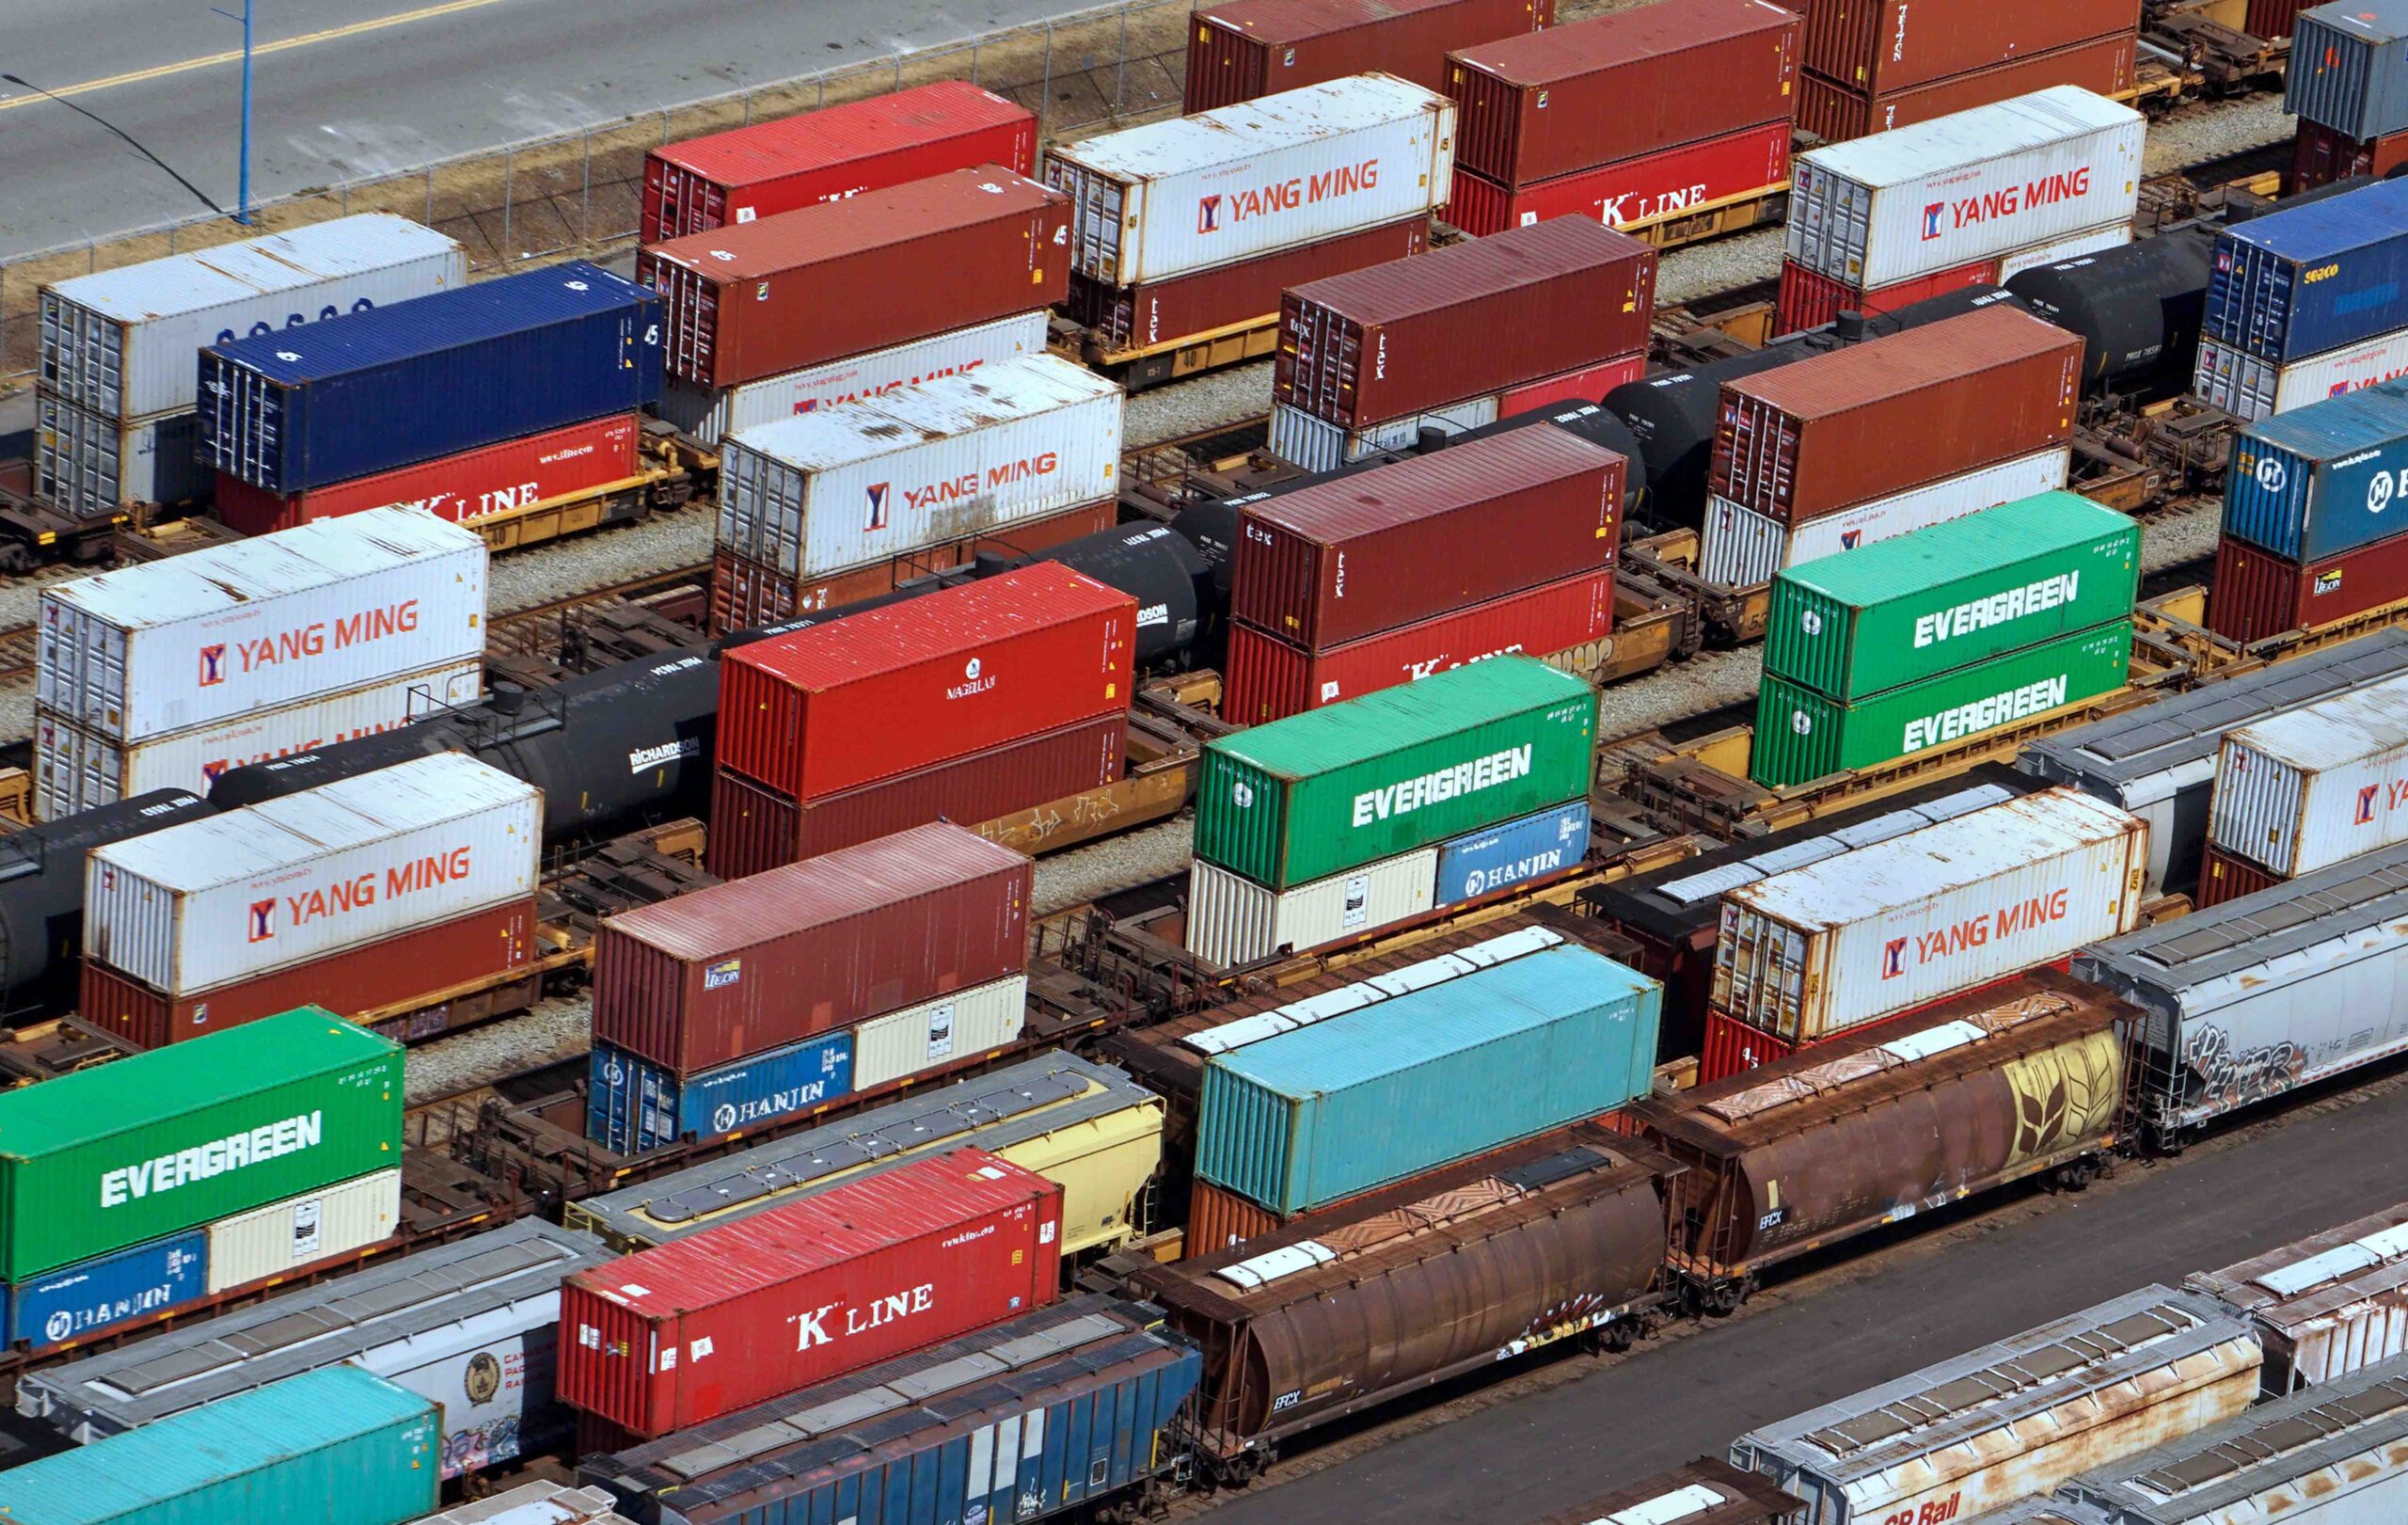 Canadian Pacific lock out threat poses another supply chain concern Atlas Logistic Network